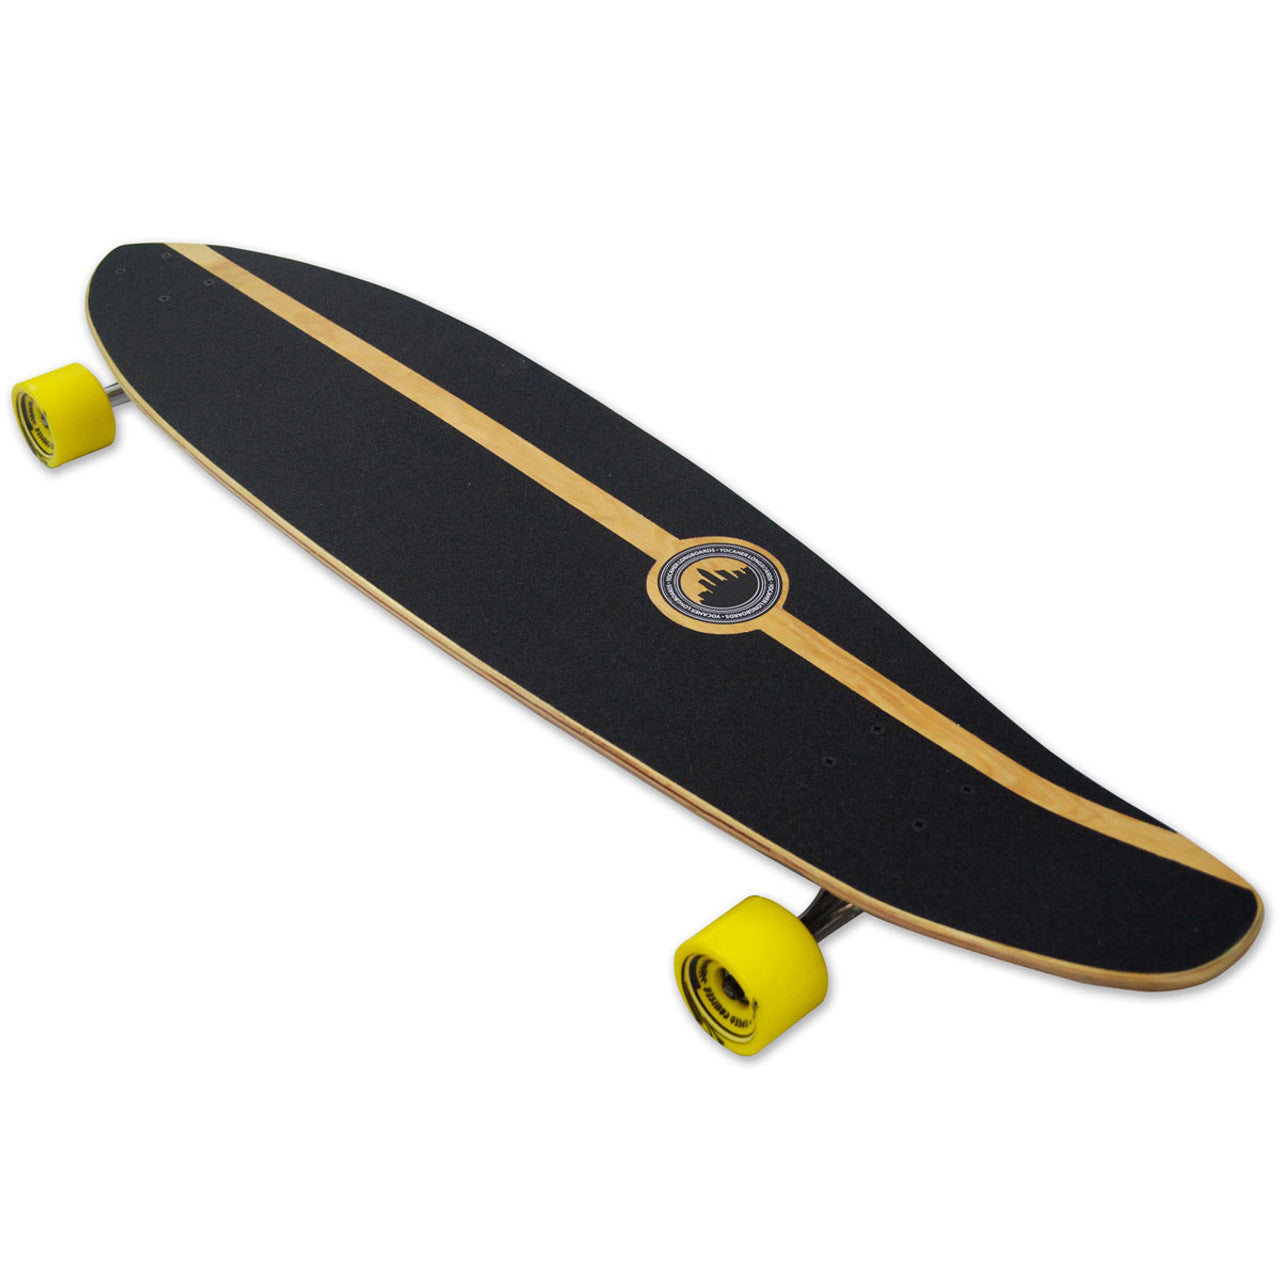 Yocaher Kicktail Longboard Complete - VW Bettle Series - Red